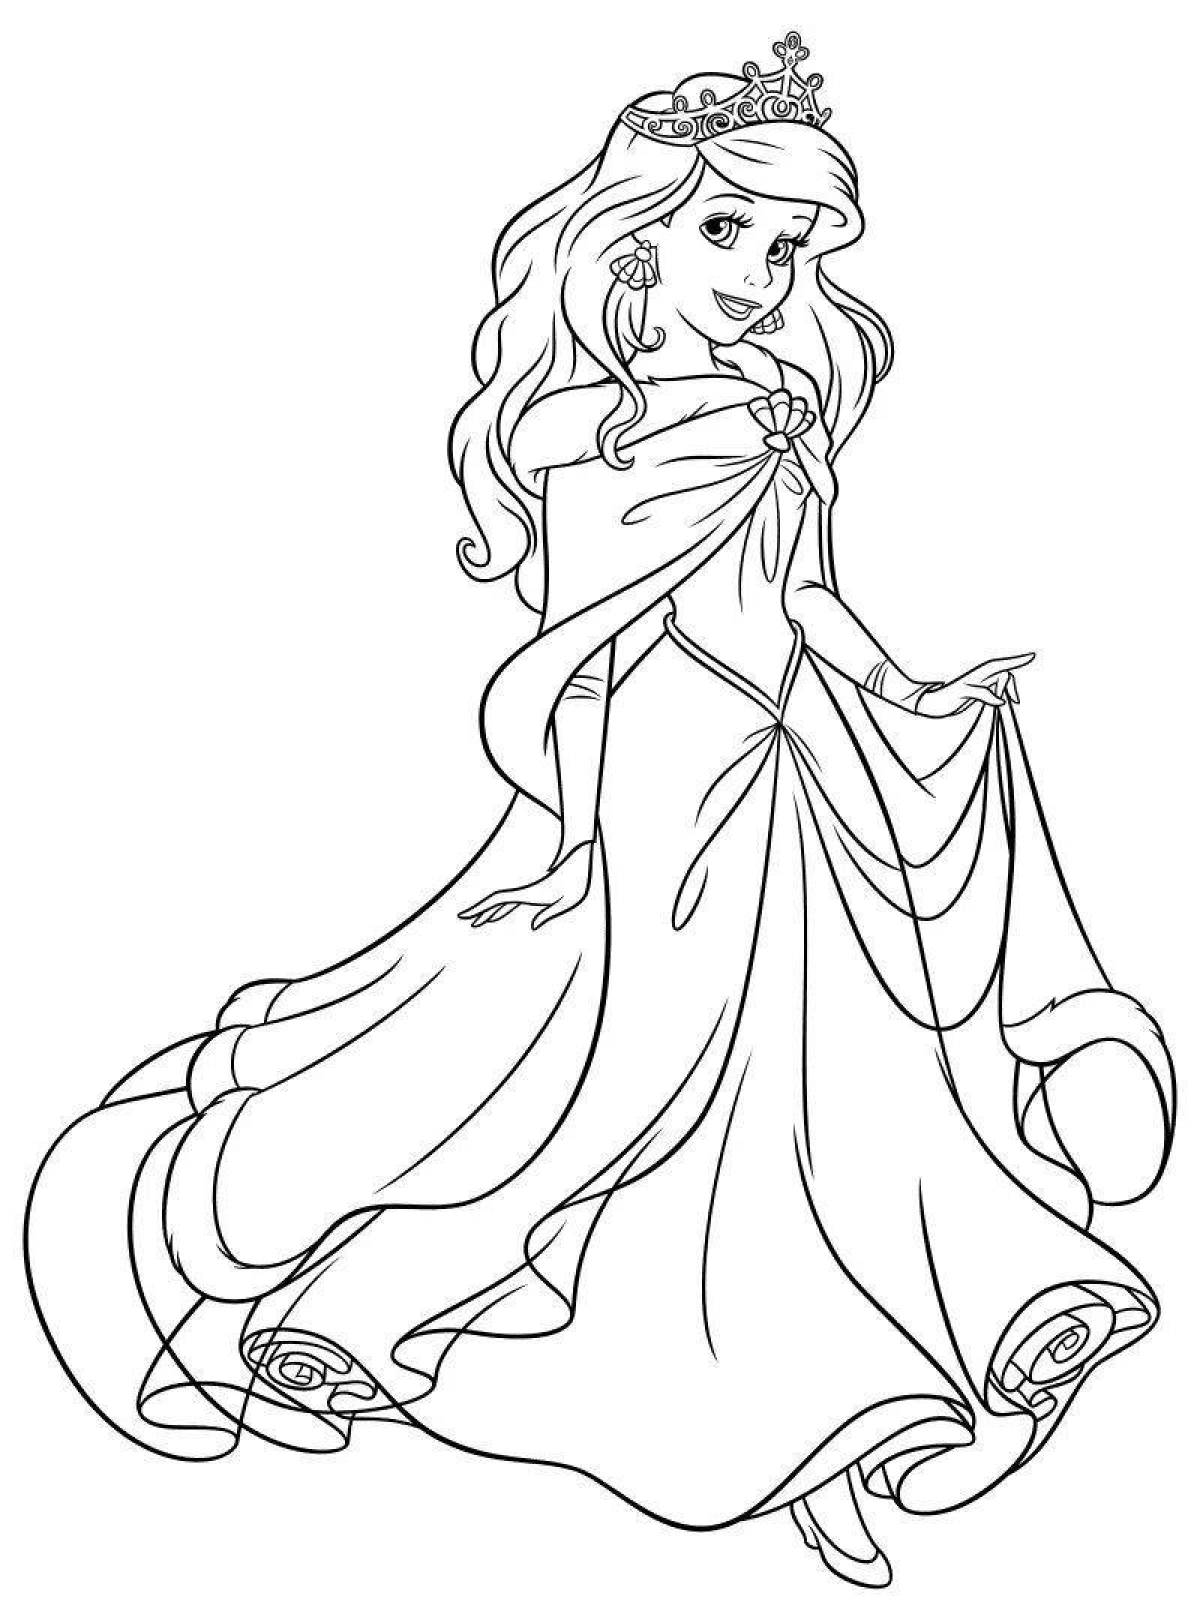 Adorable princess coloring pages new